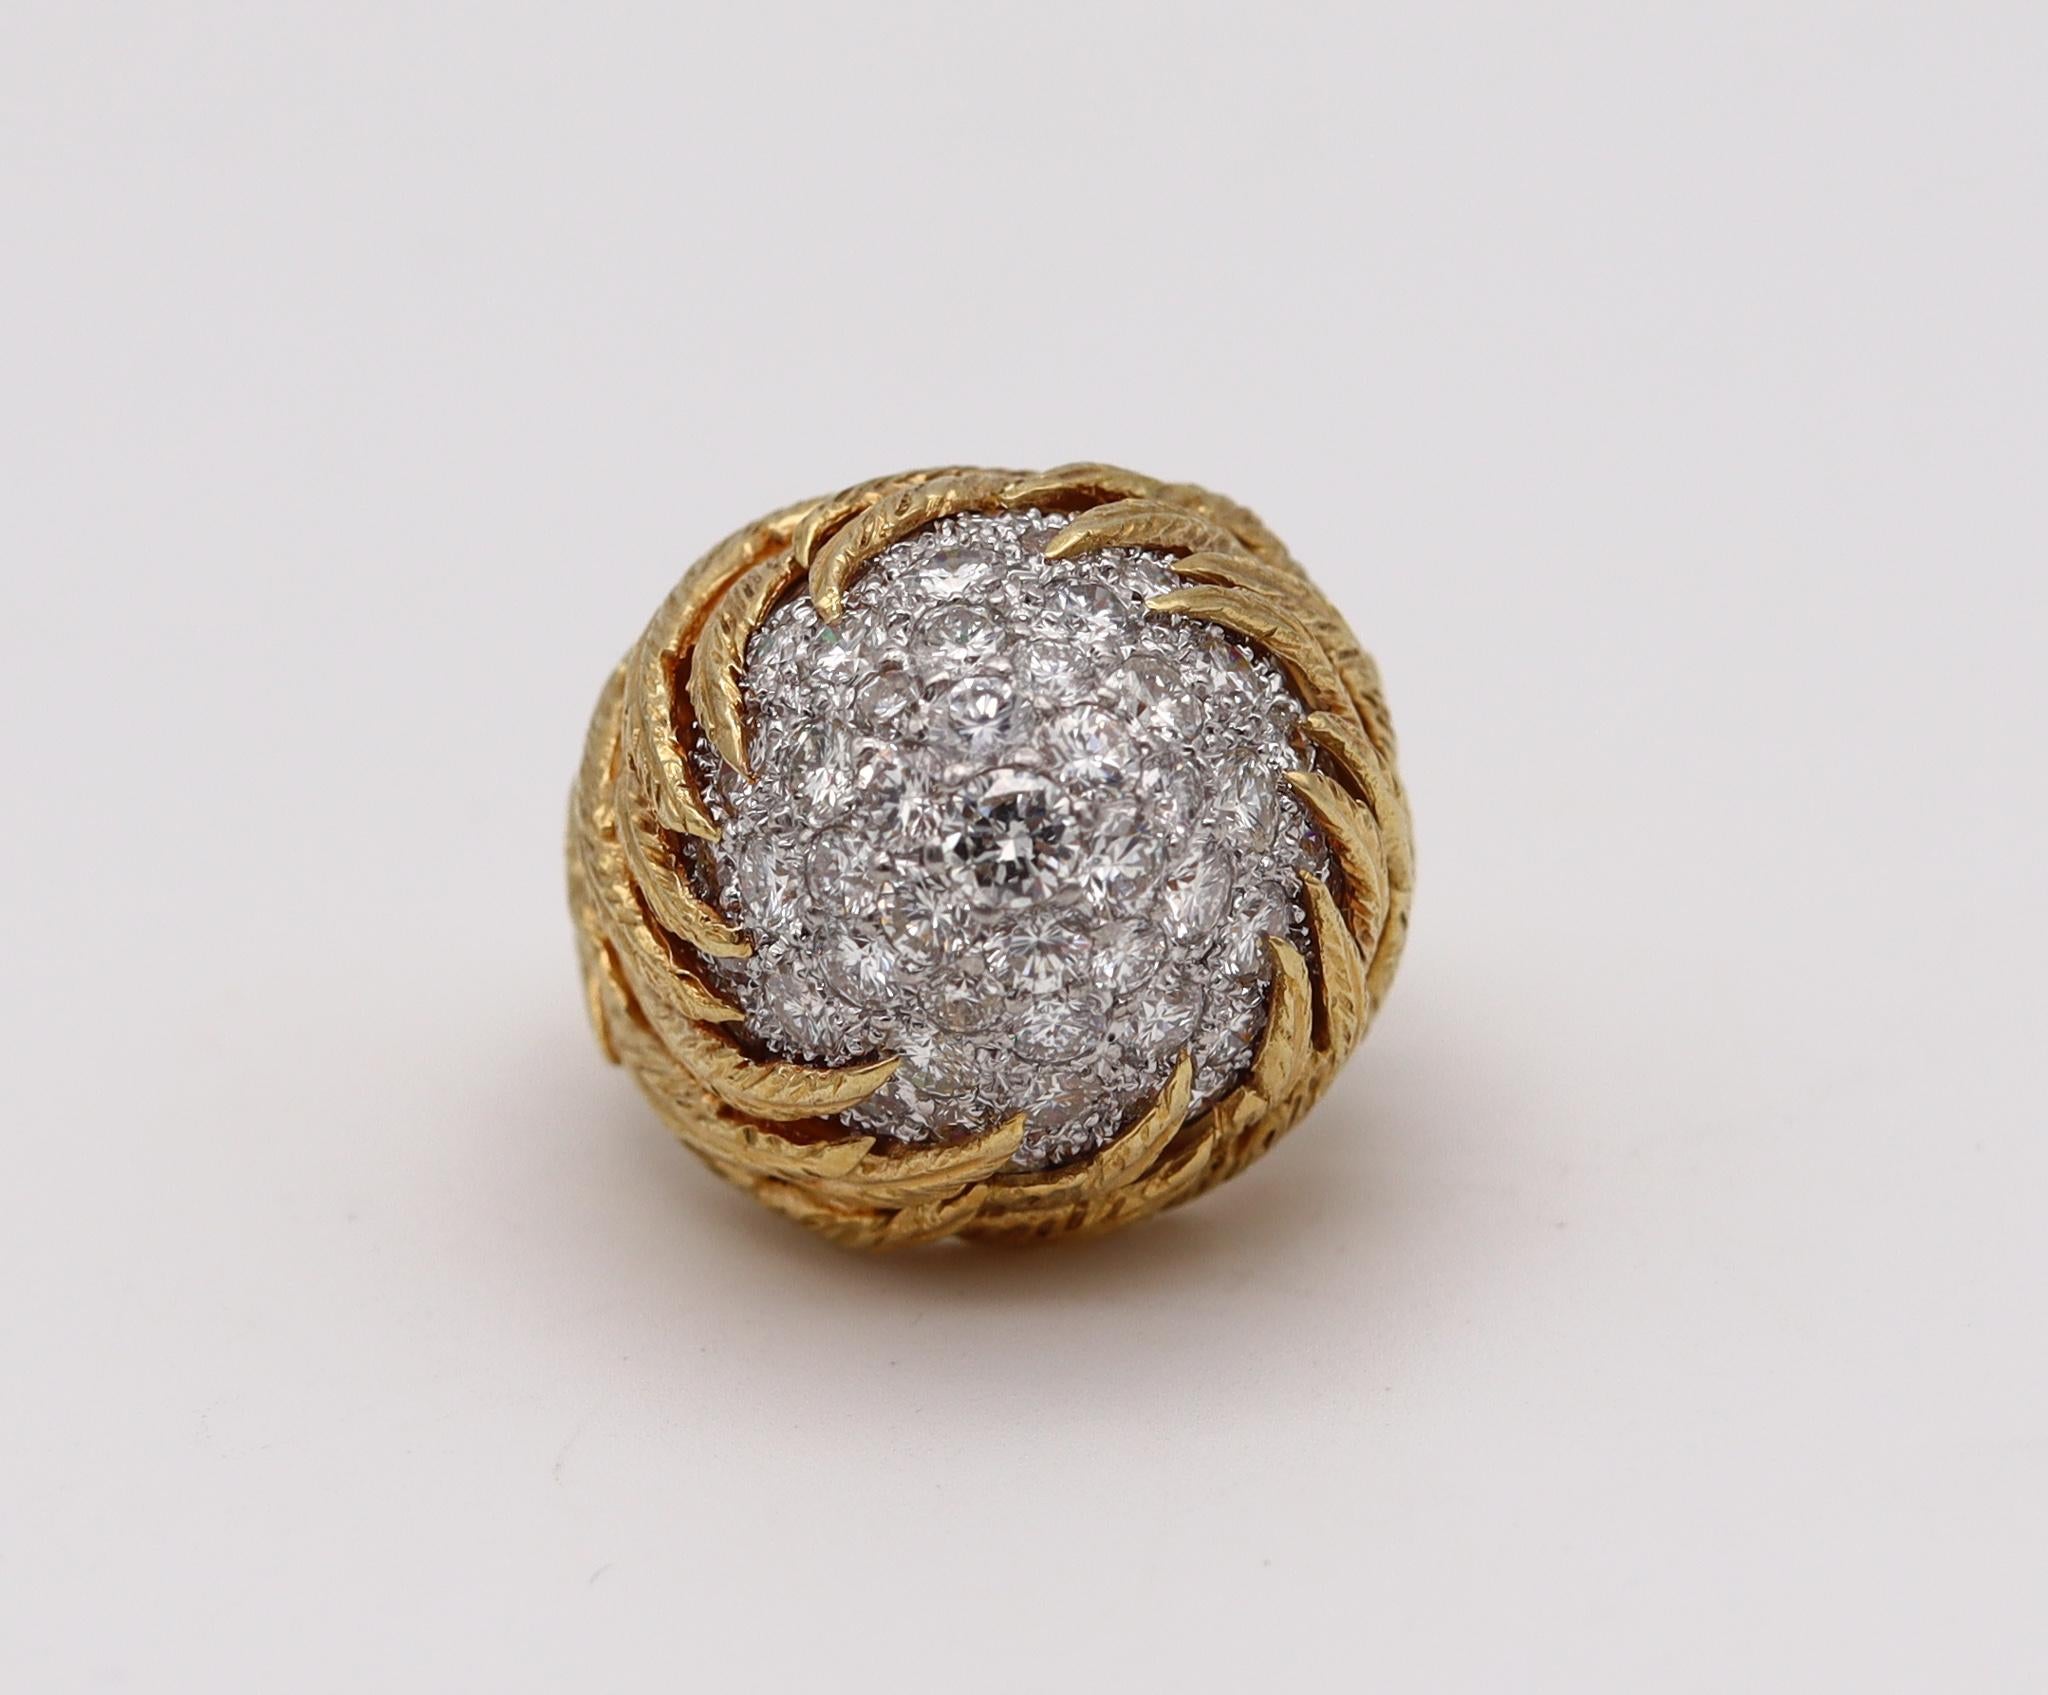 An Italian gem set bombe ring.

Beautiful sculpted piece, created in Milano Italy during the post war and the mid century periods, back in the 1960. This bombe cocktail ring has been crafted with a textured feathers patterns in solid yellow gold of